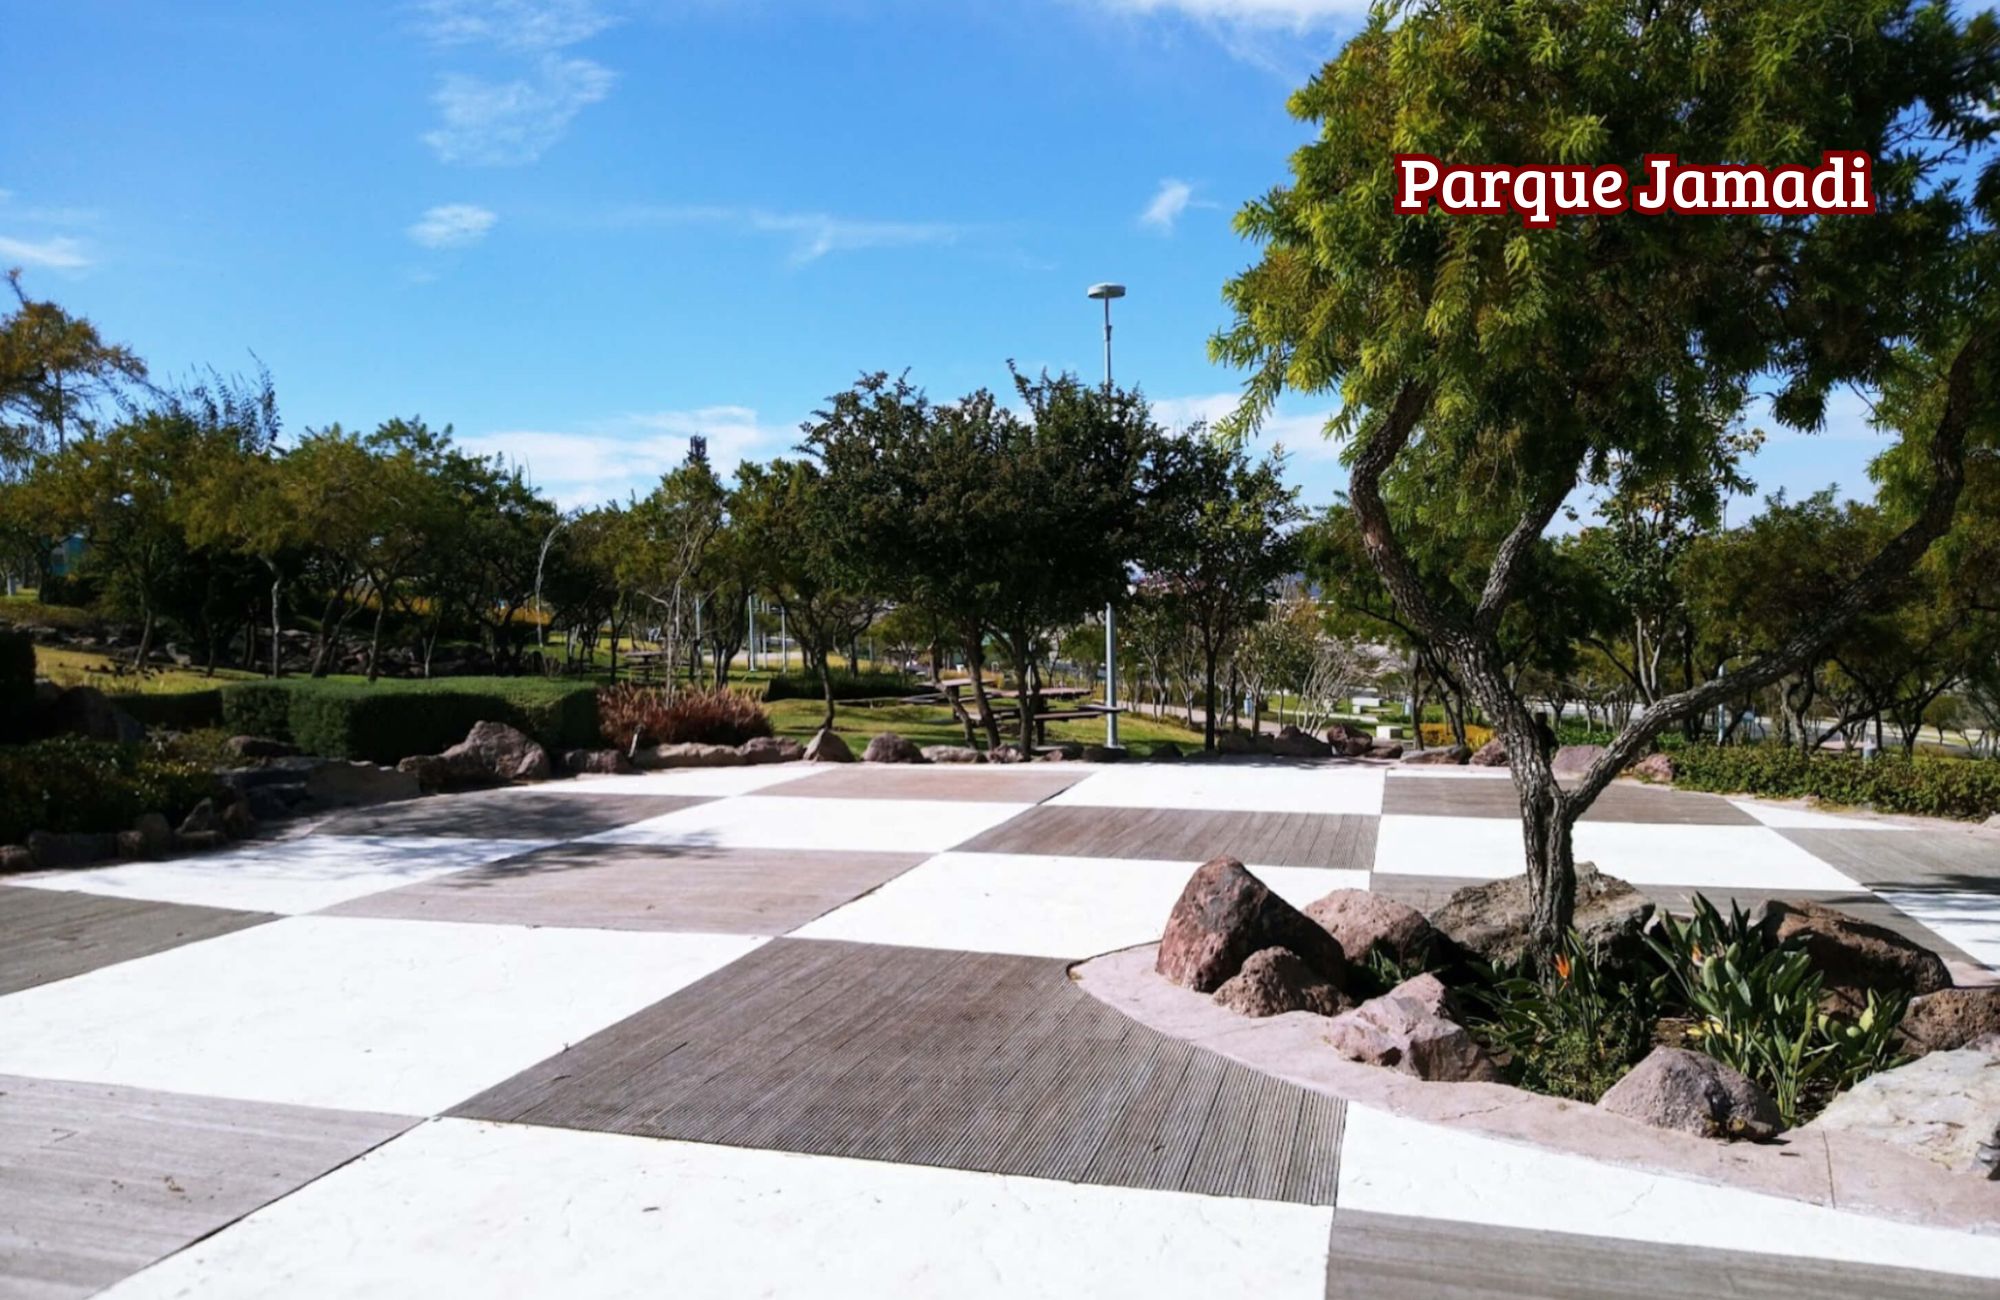 Apartment with study, garden, dressing room, pool, gym and terrace, for sale, Queretaro.